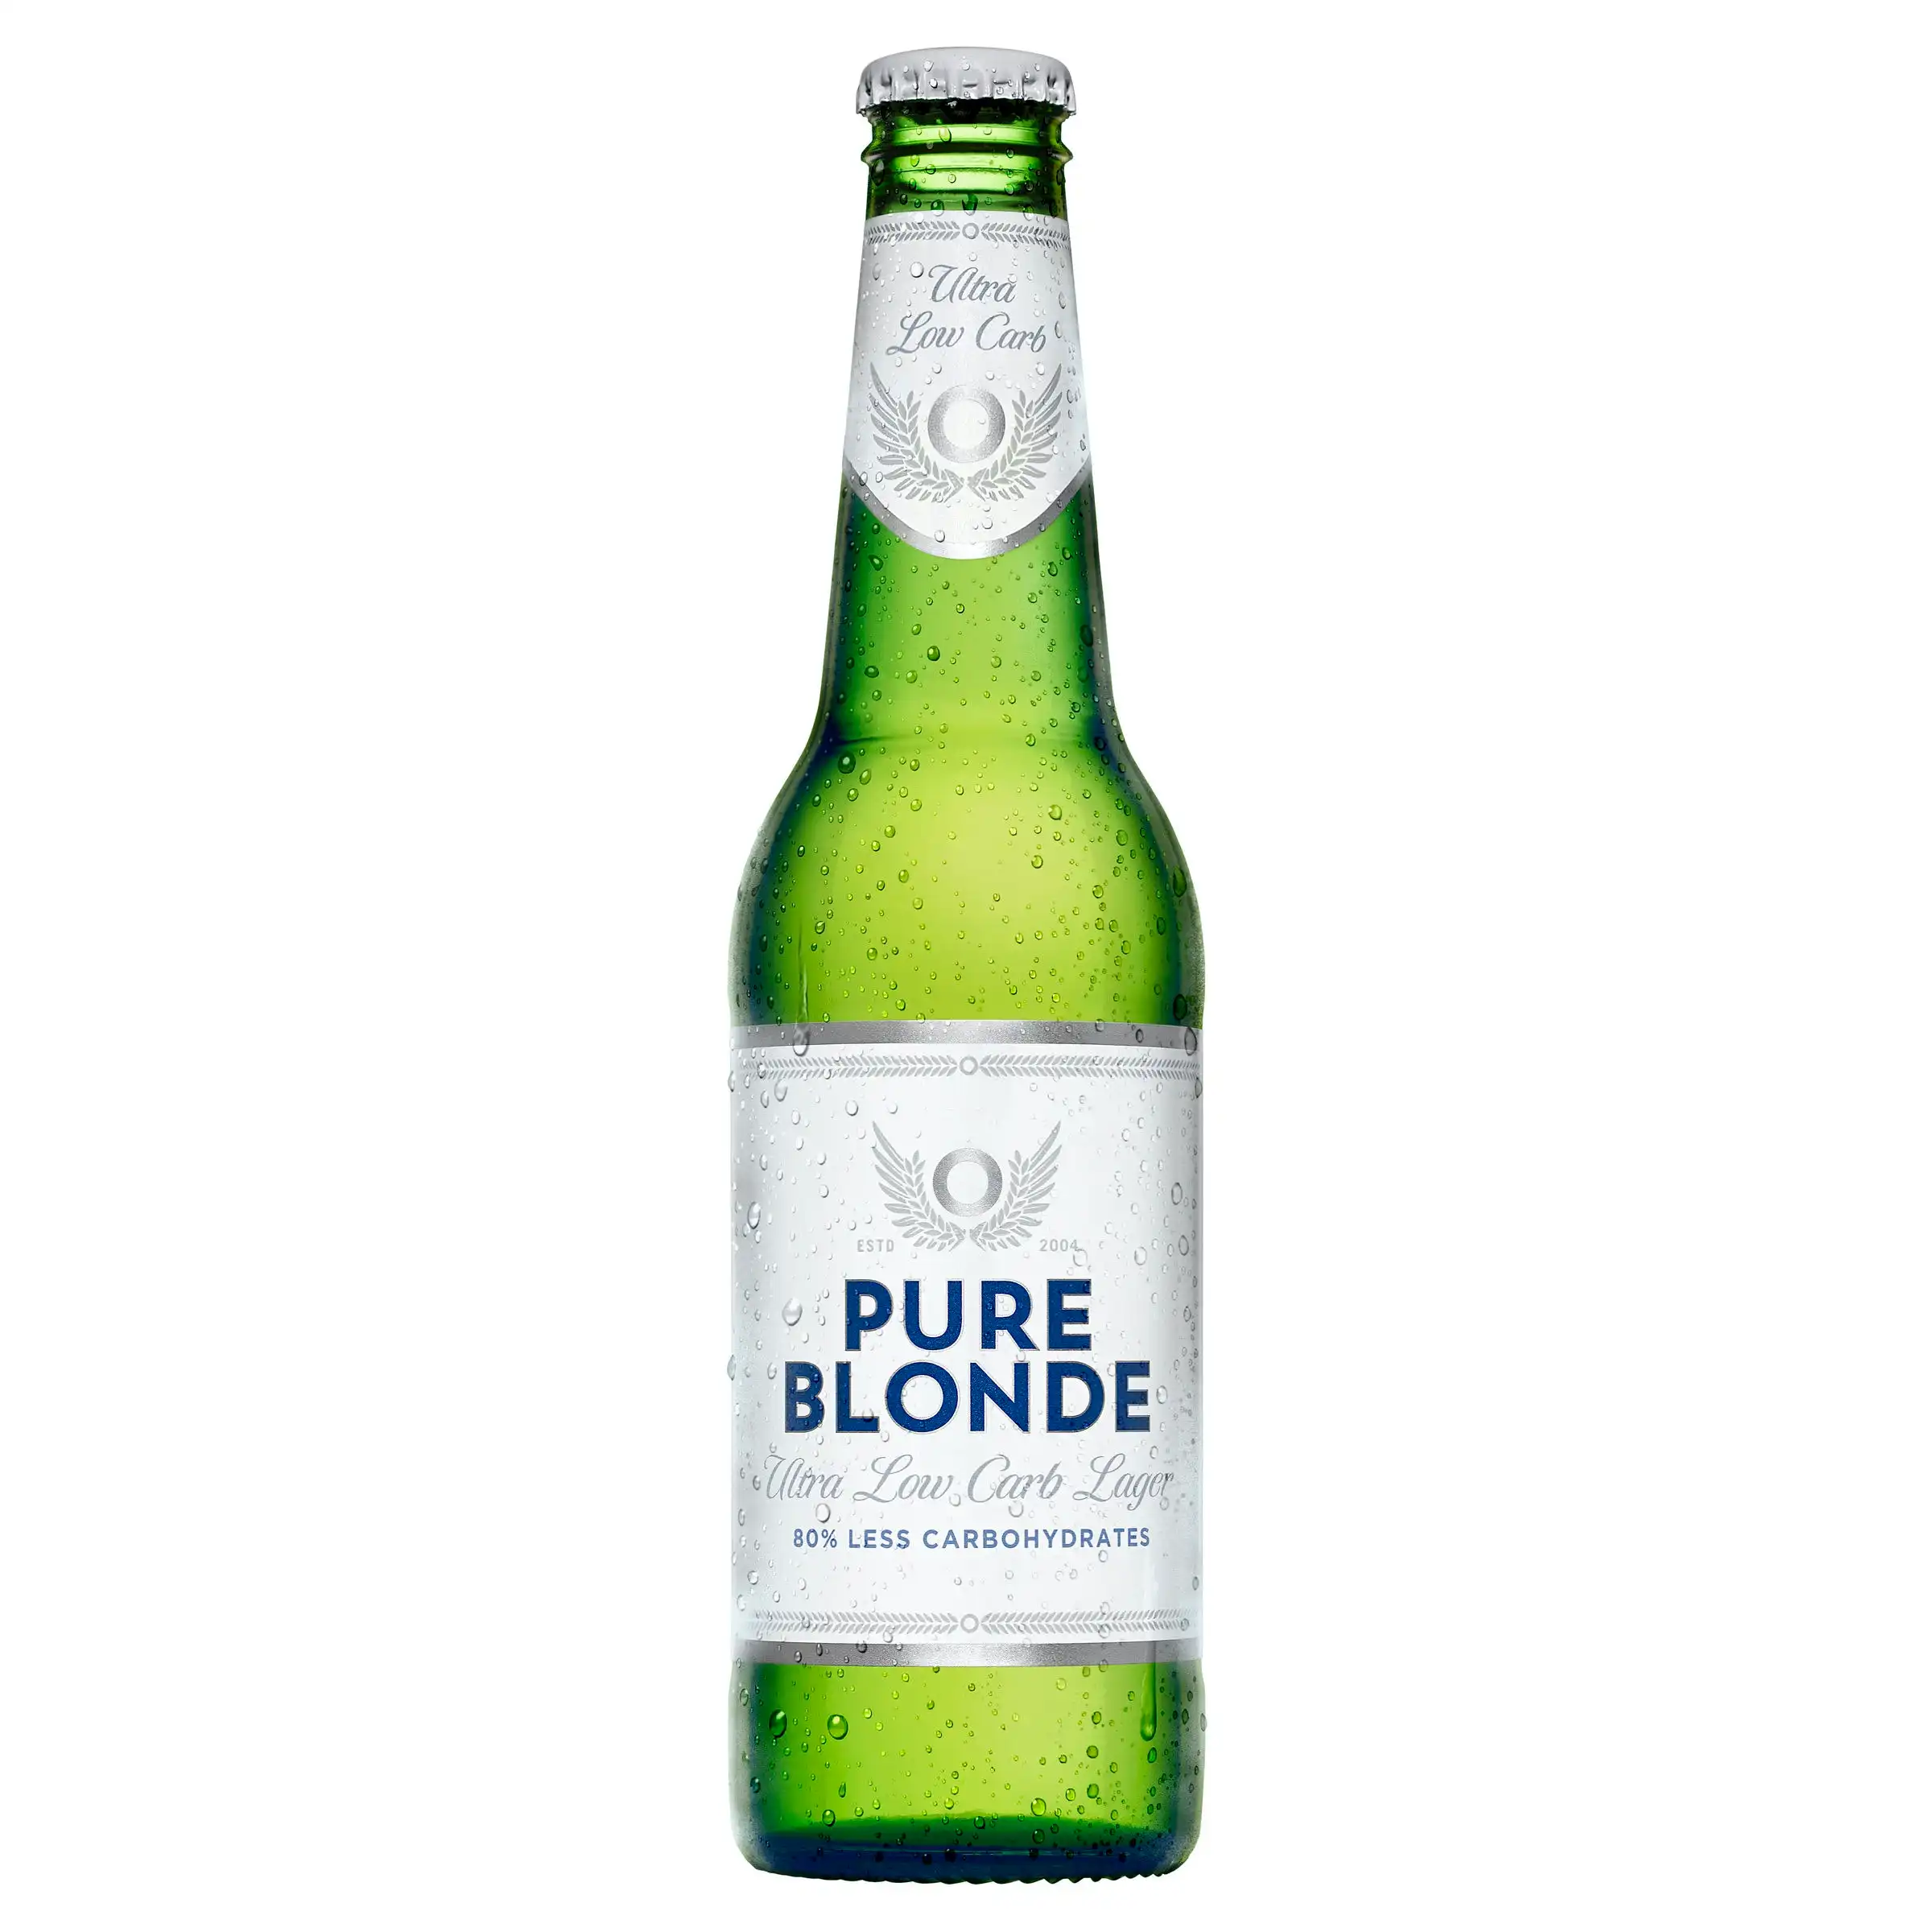 Pure Blonde Ultra Low Carb Lager Beer 24 x 355mL Bottles